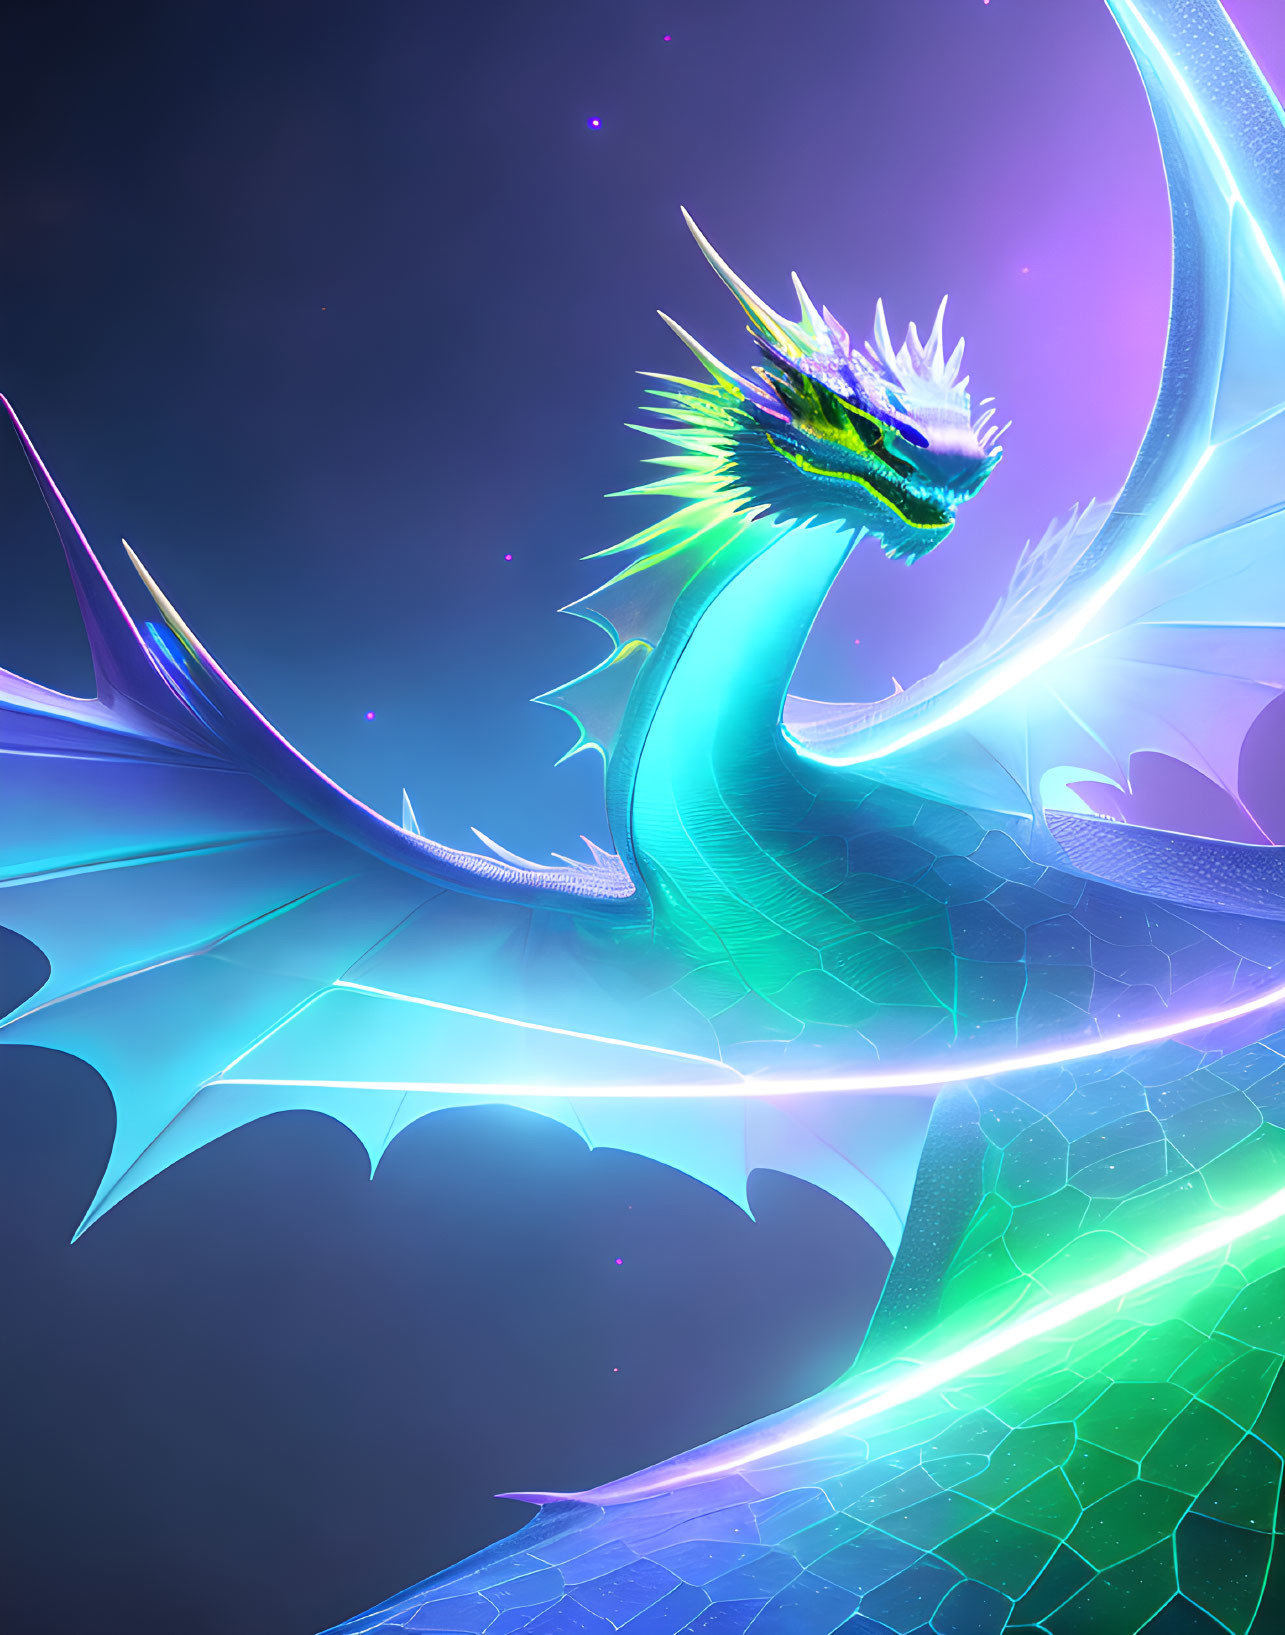 Colorful Dragon Artwork with Iridescent Scales and Neon Wings on Dark Purple Background